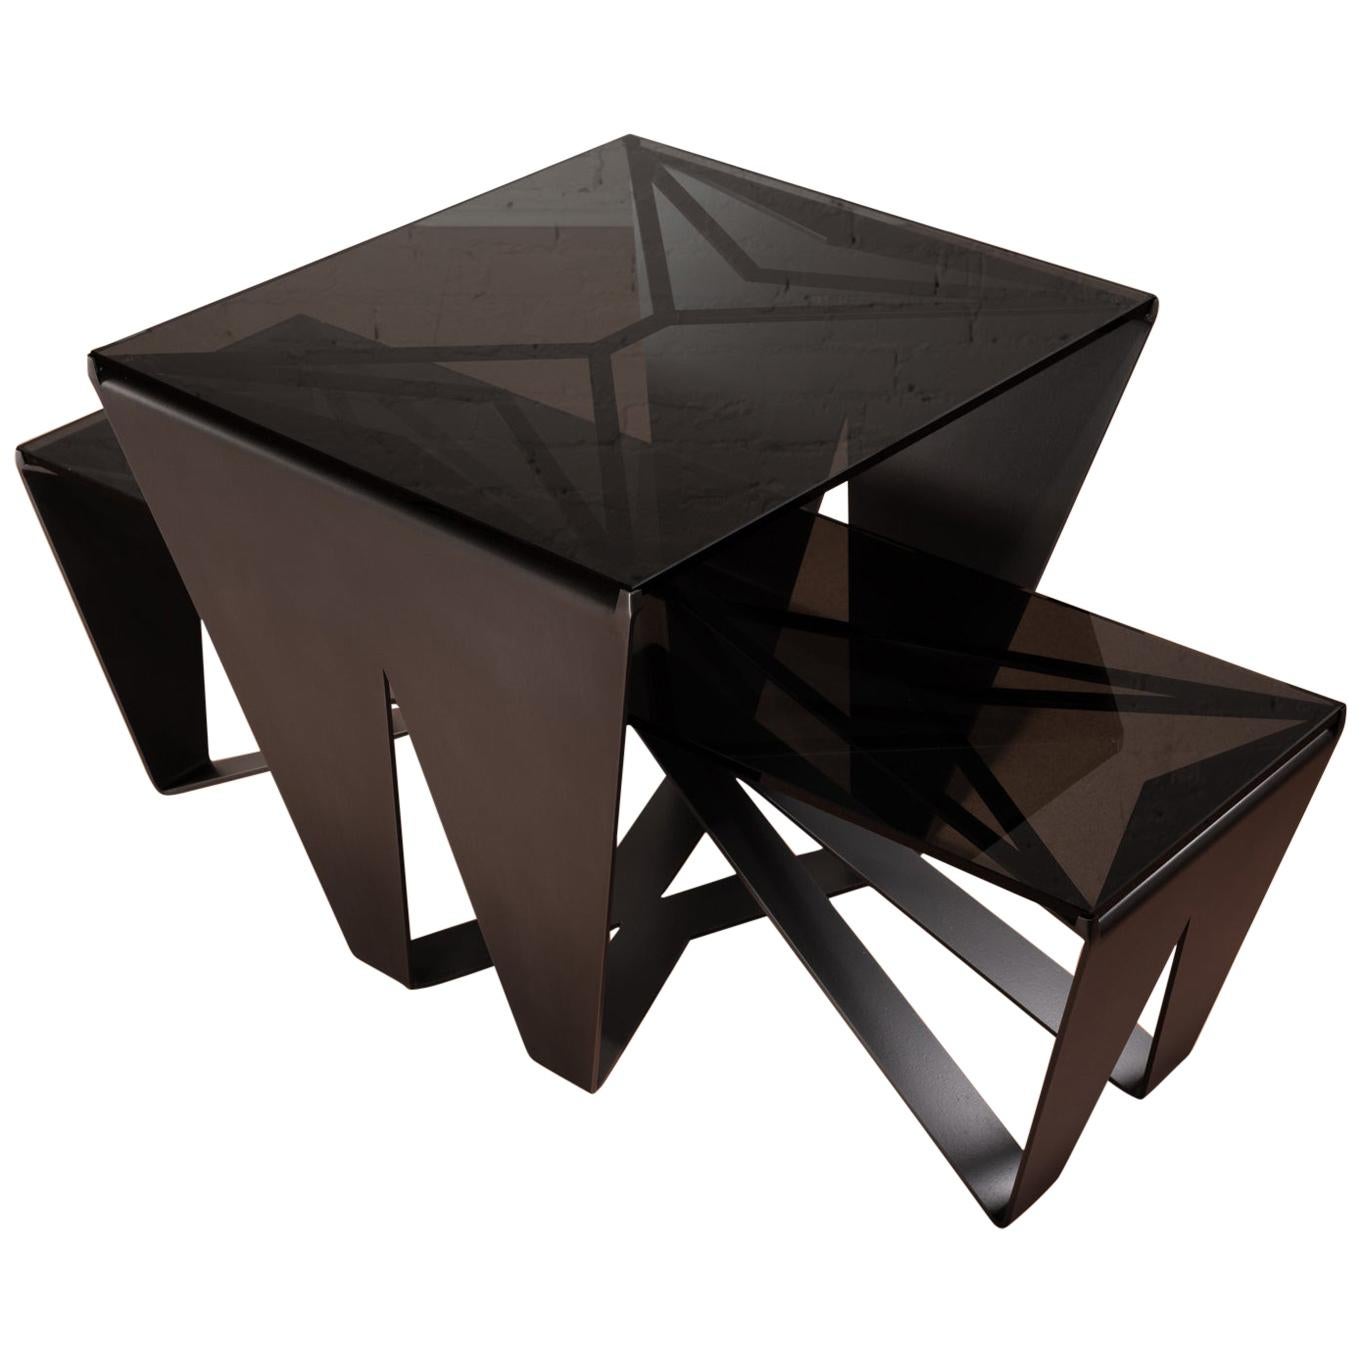 Nesting Domino Coffee Tables, Blackened Steel, Gray Glass, by Force/Collide